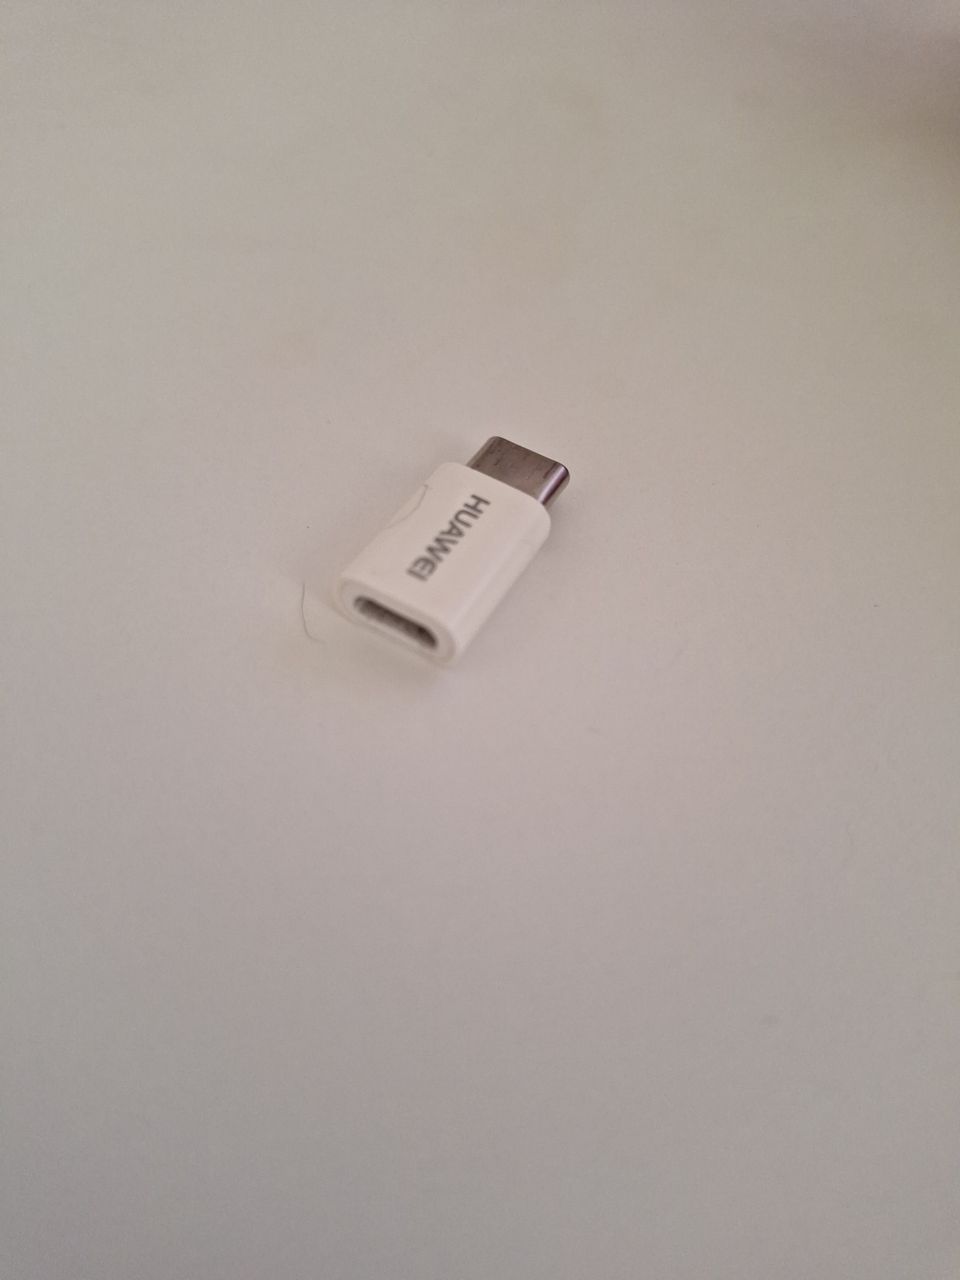 Female Micro USB to male USB C adapter.